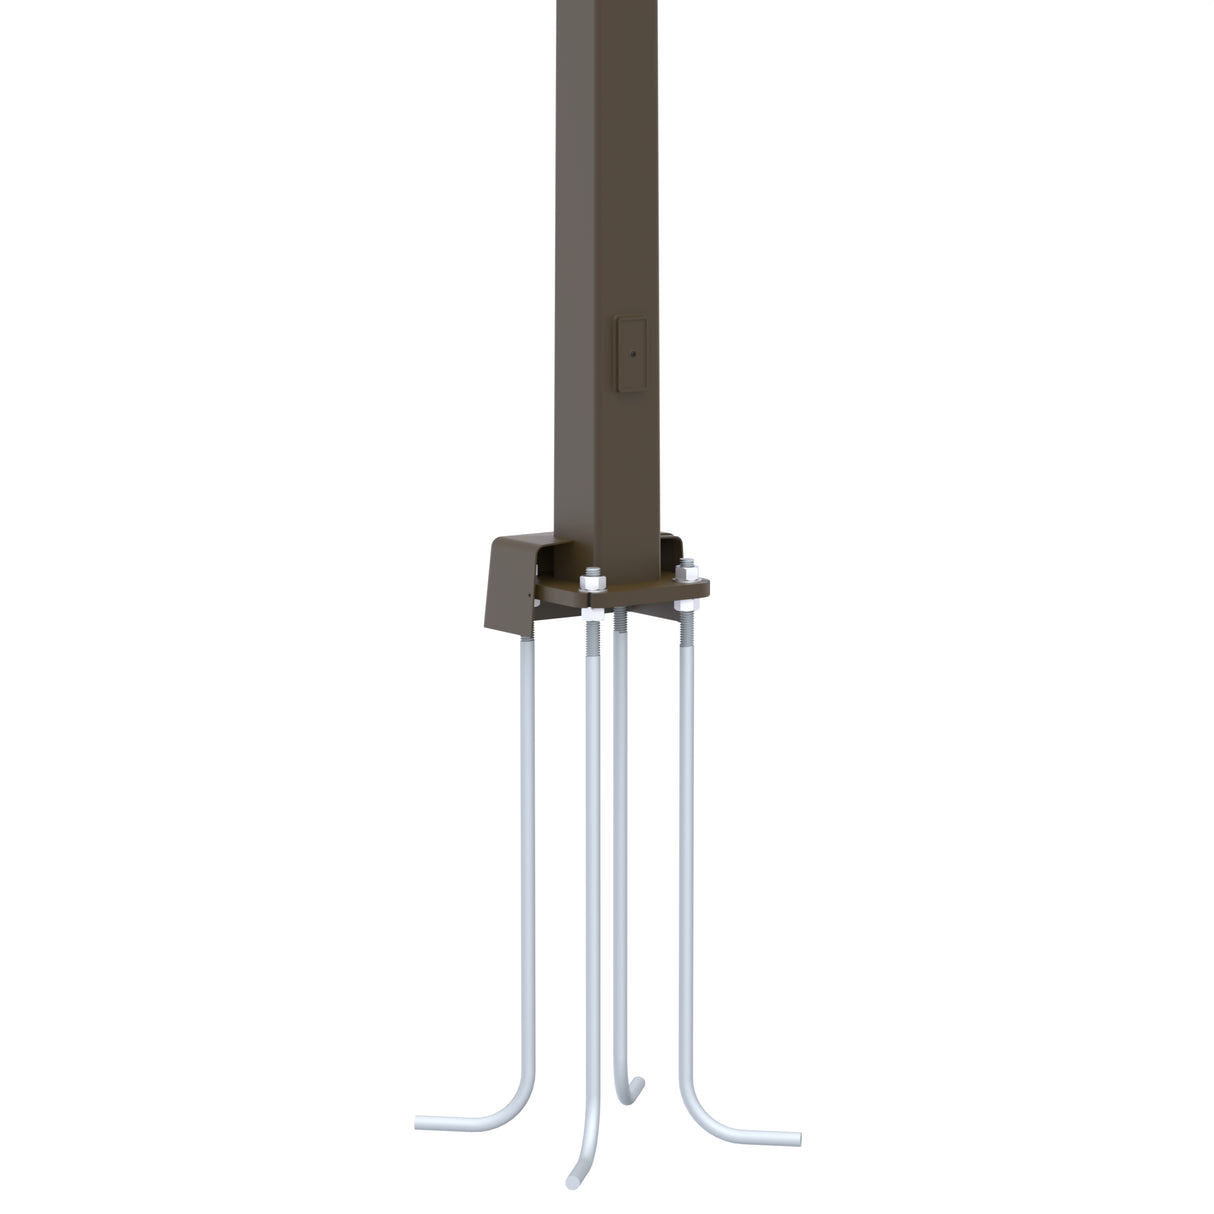 20' Tall x 5.5" Base OD x 3.3" Top OD x 7ga Thick, Square Tapered Steel, Anchor Base Light Pole